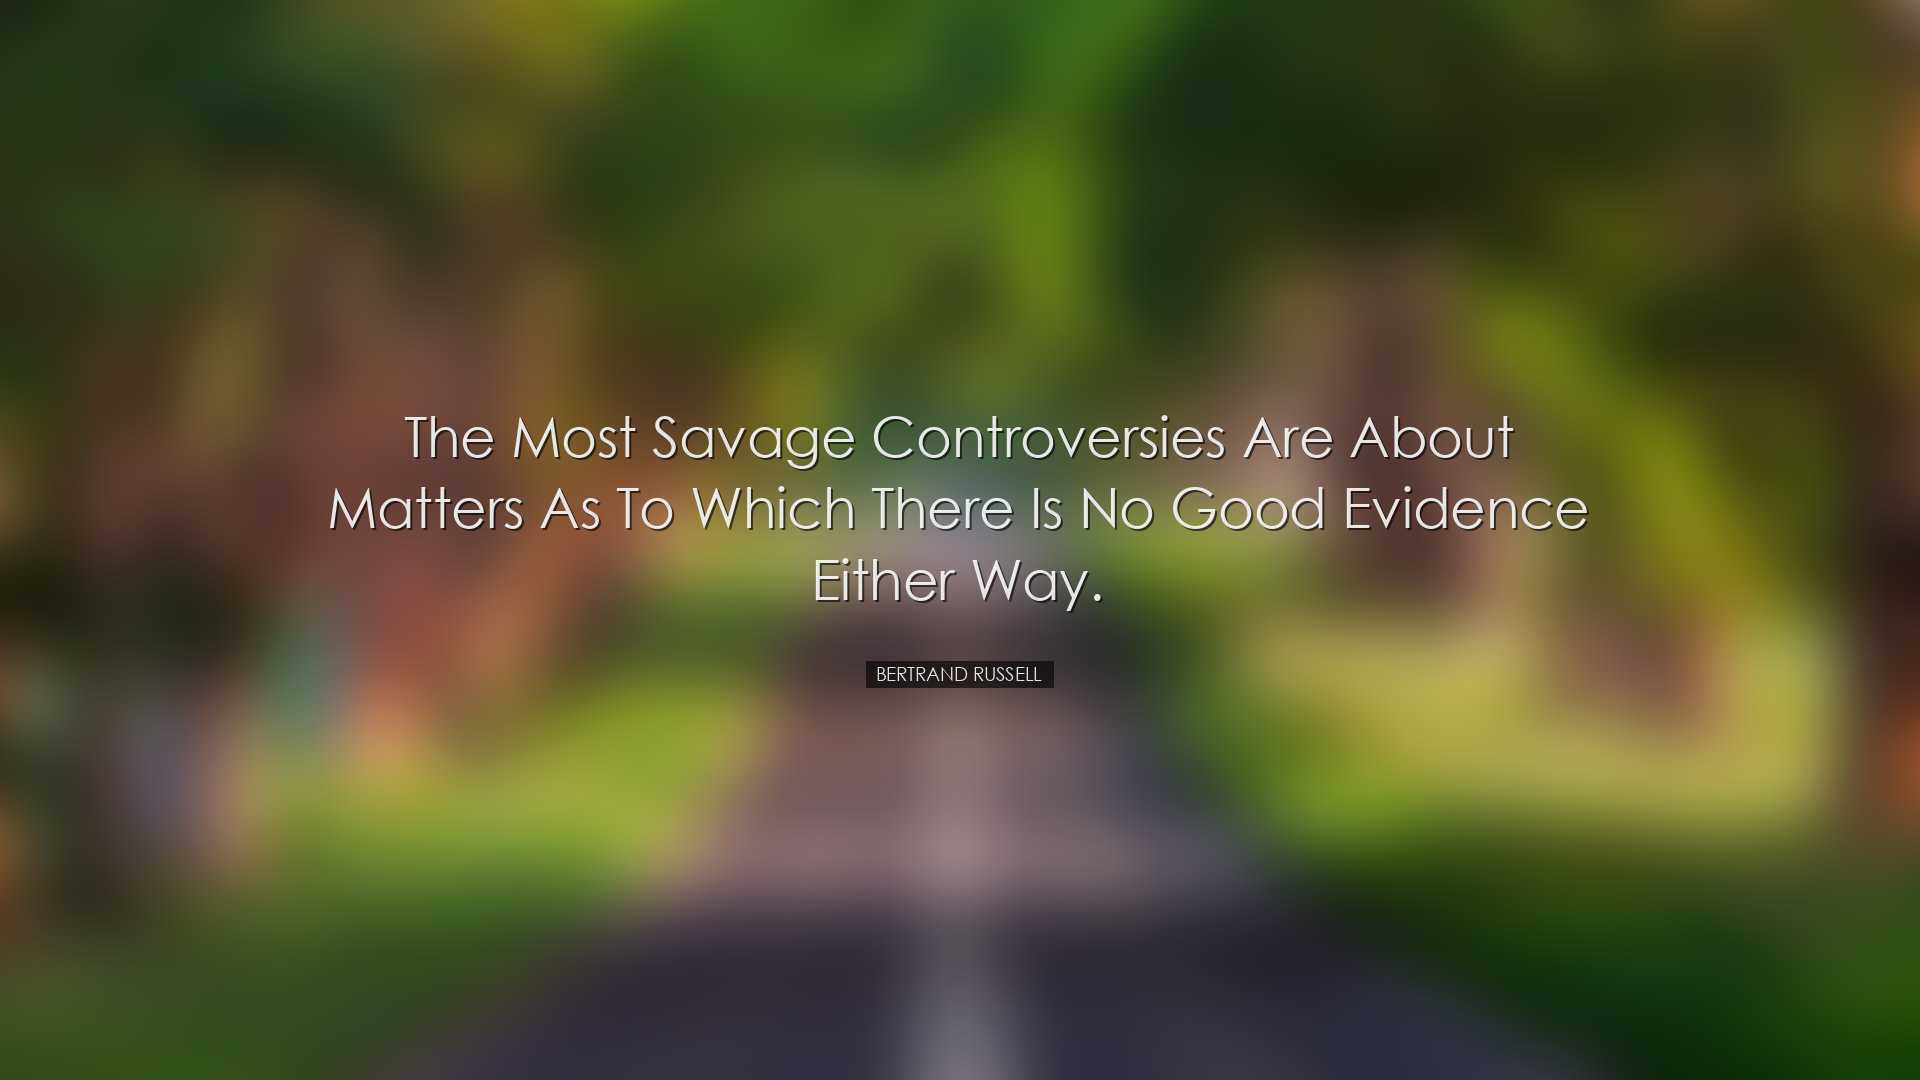 The most savage controversies are about matters as to which there